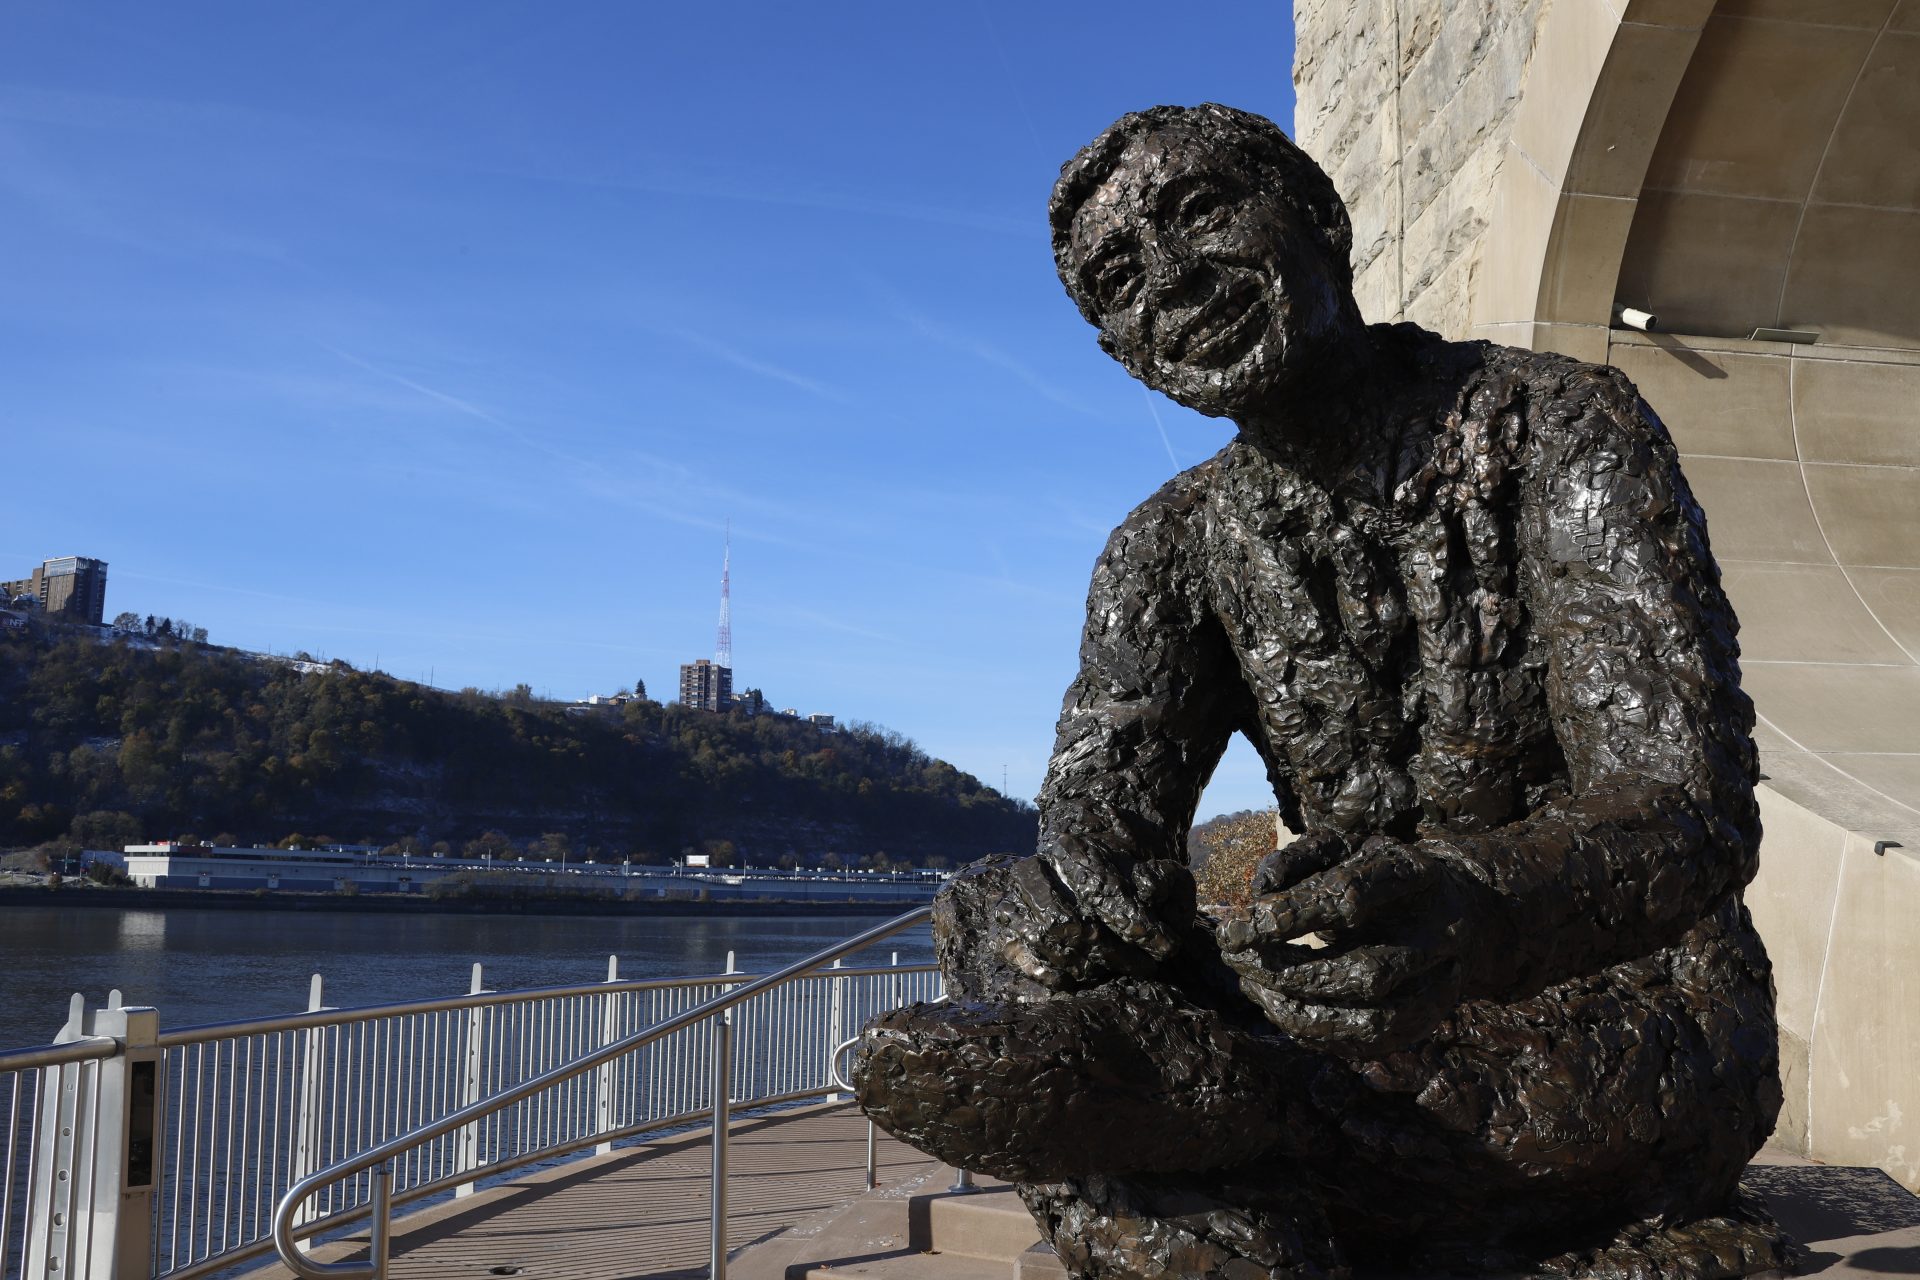 This Nov. 13, 2019 file photo shows a statue of Fred Rogers perched at the confluence of the Allegheny, Monongahela, and Ohio Rivers in the Northside of Pittsburgh.